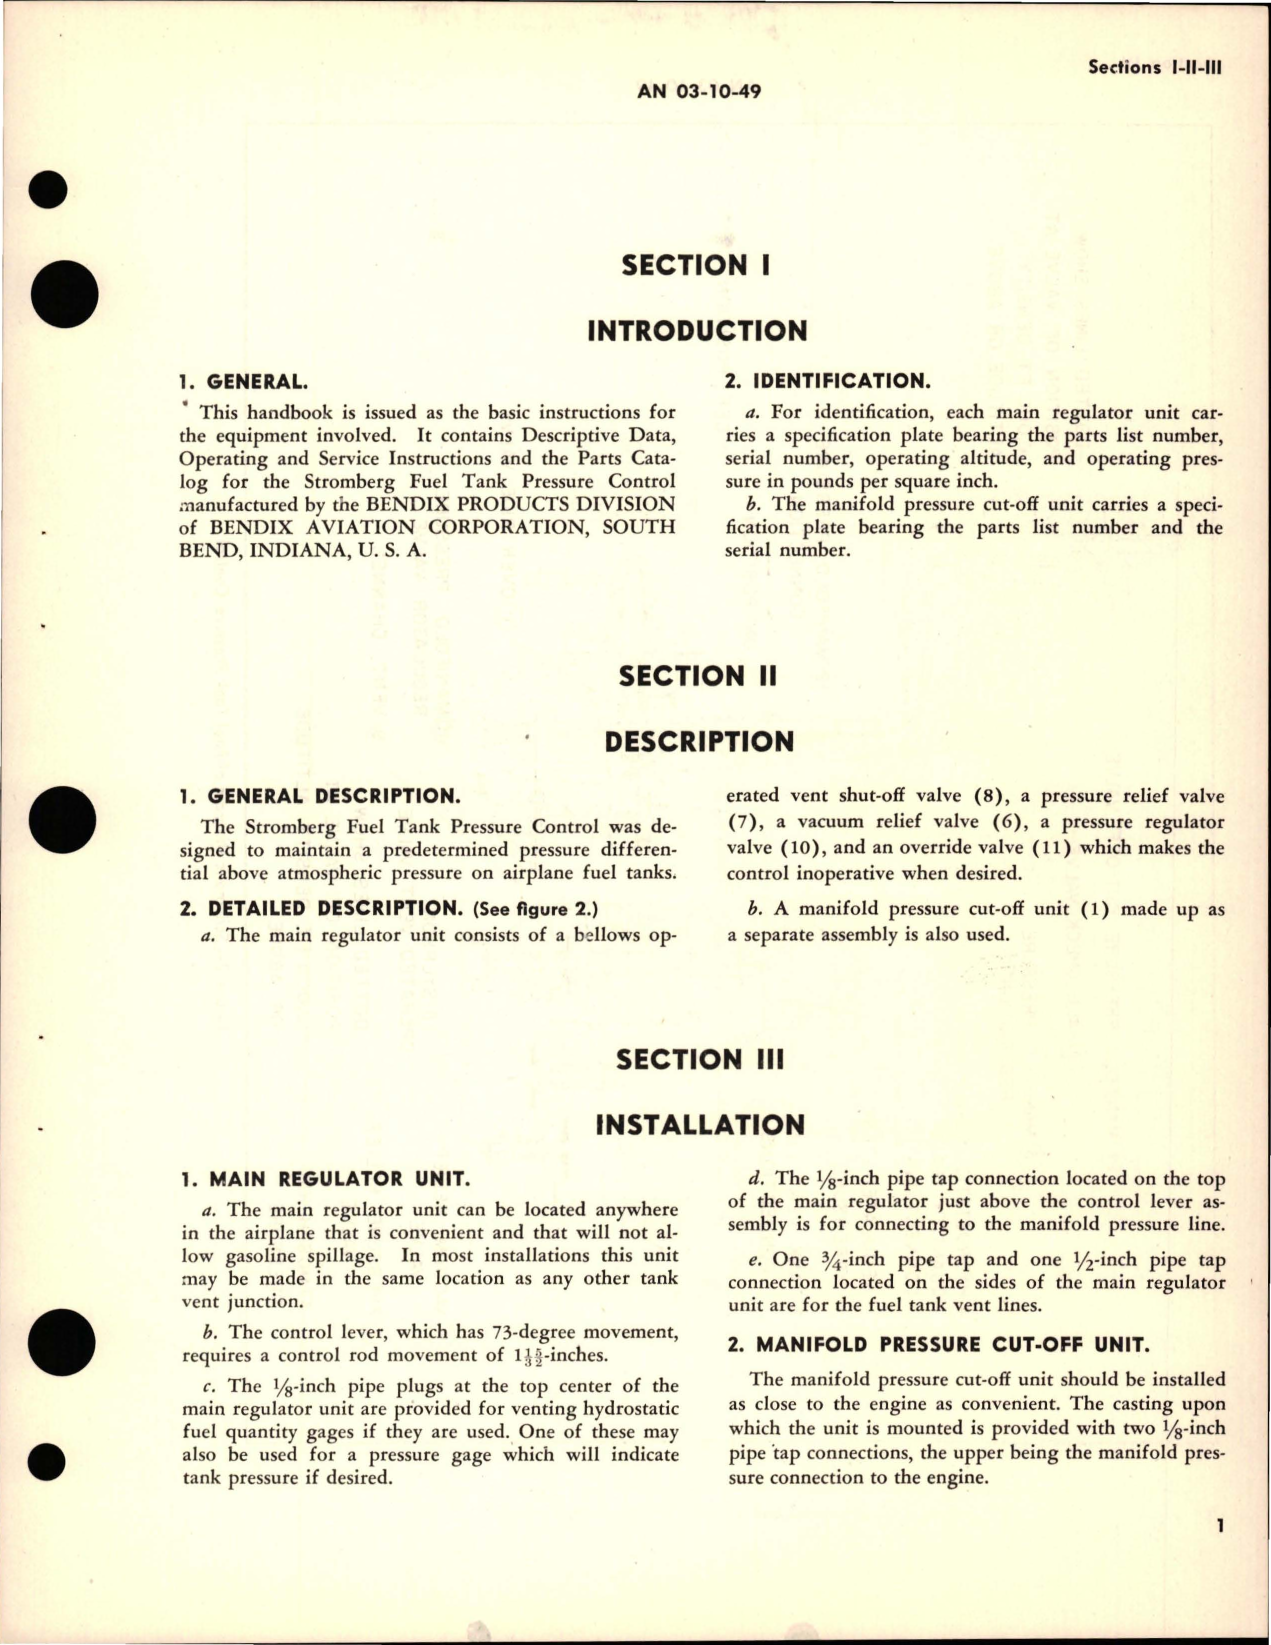 Sample page 5 from AirCorps Library document: Instructions with Parts Catalog for Fuel Tank Pressure Control